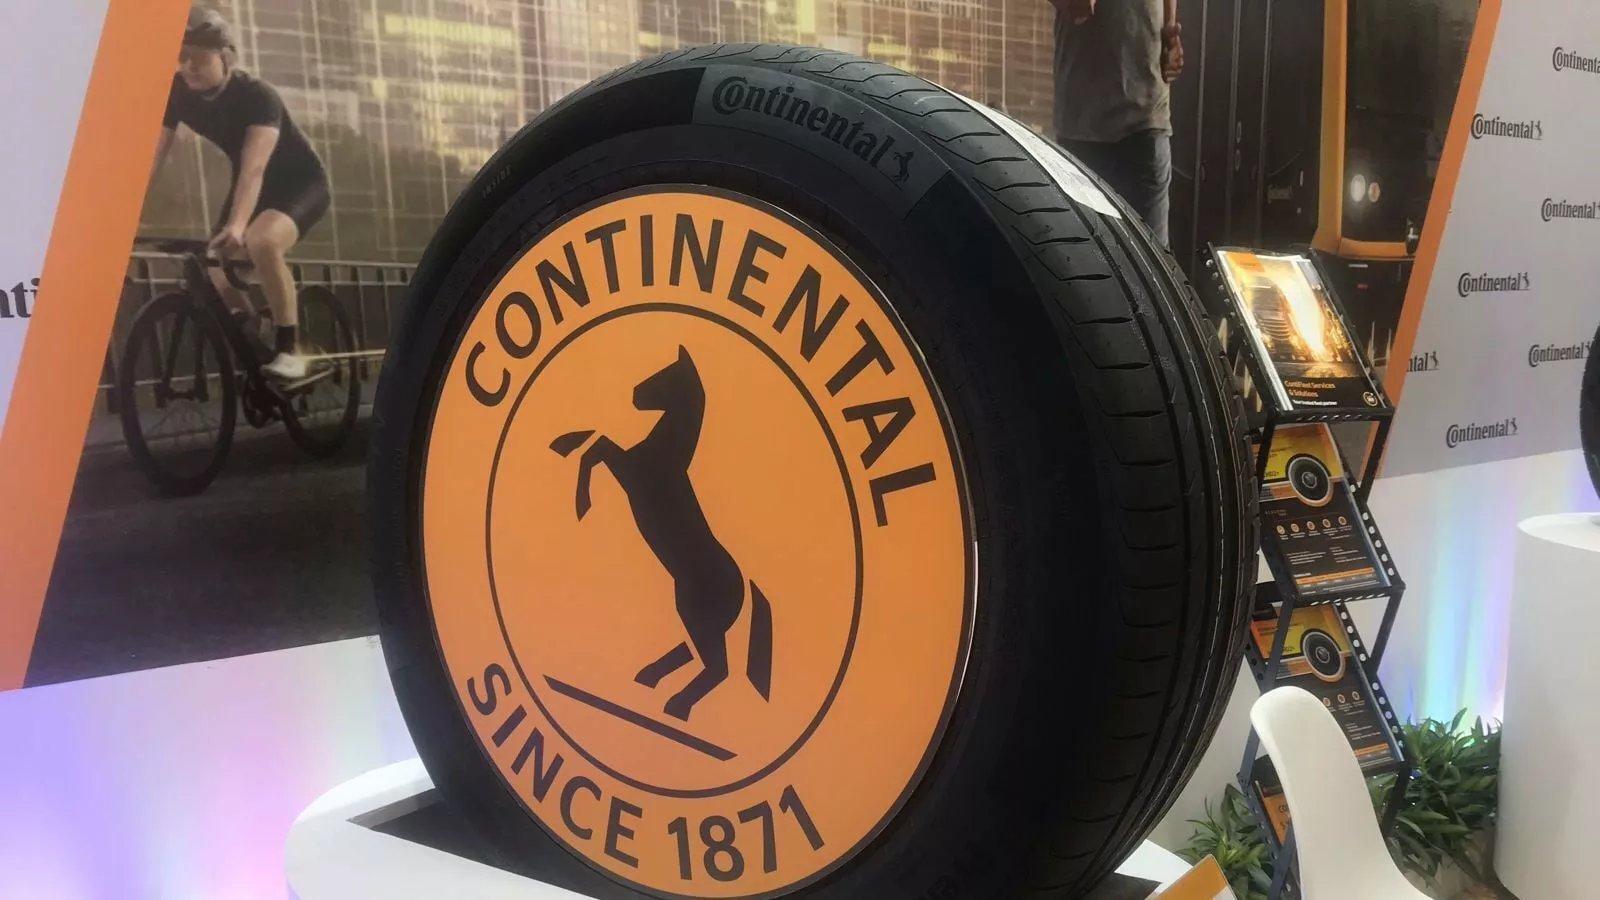 Continental’s ContiSeal tyre technology can help increase tyre life. Here’s how